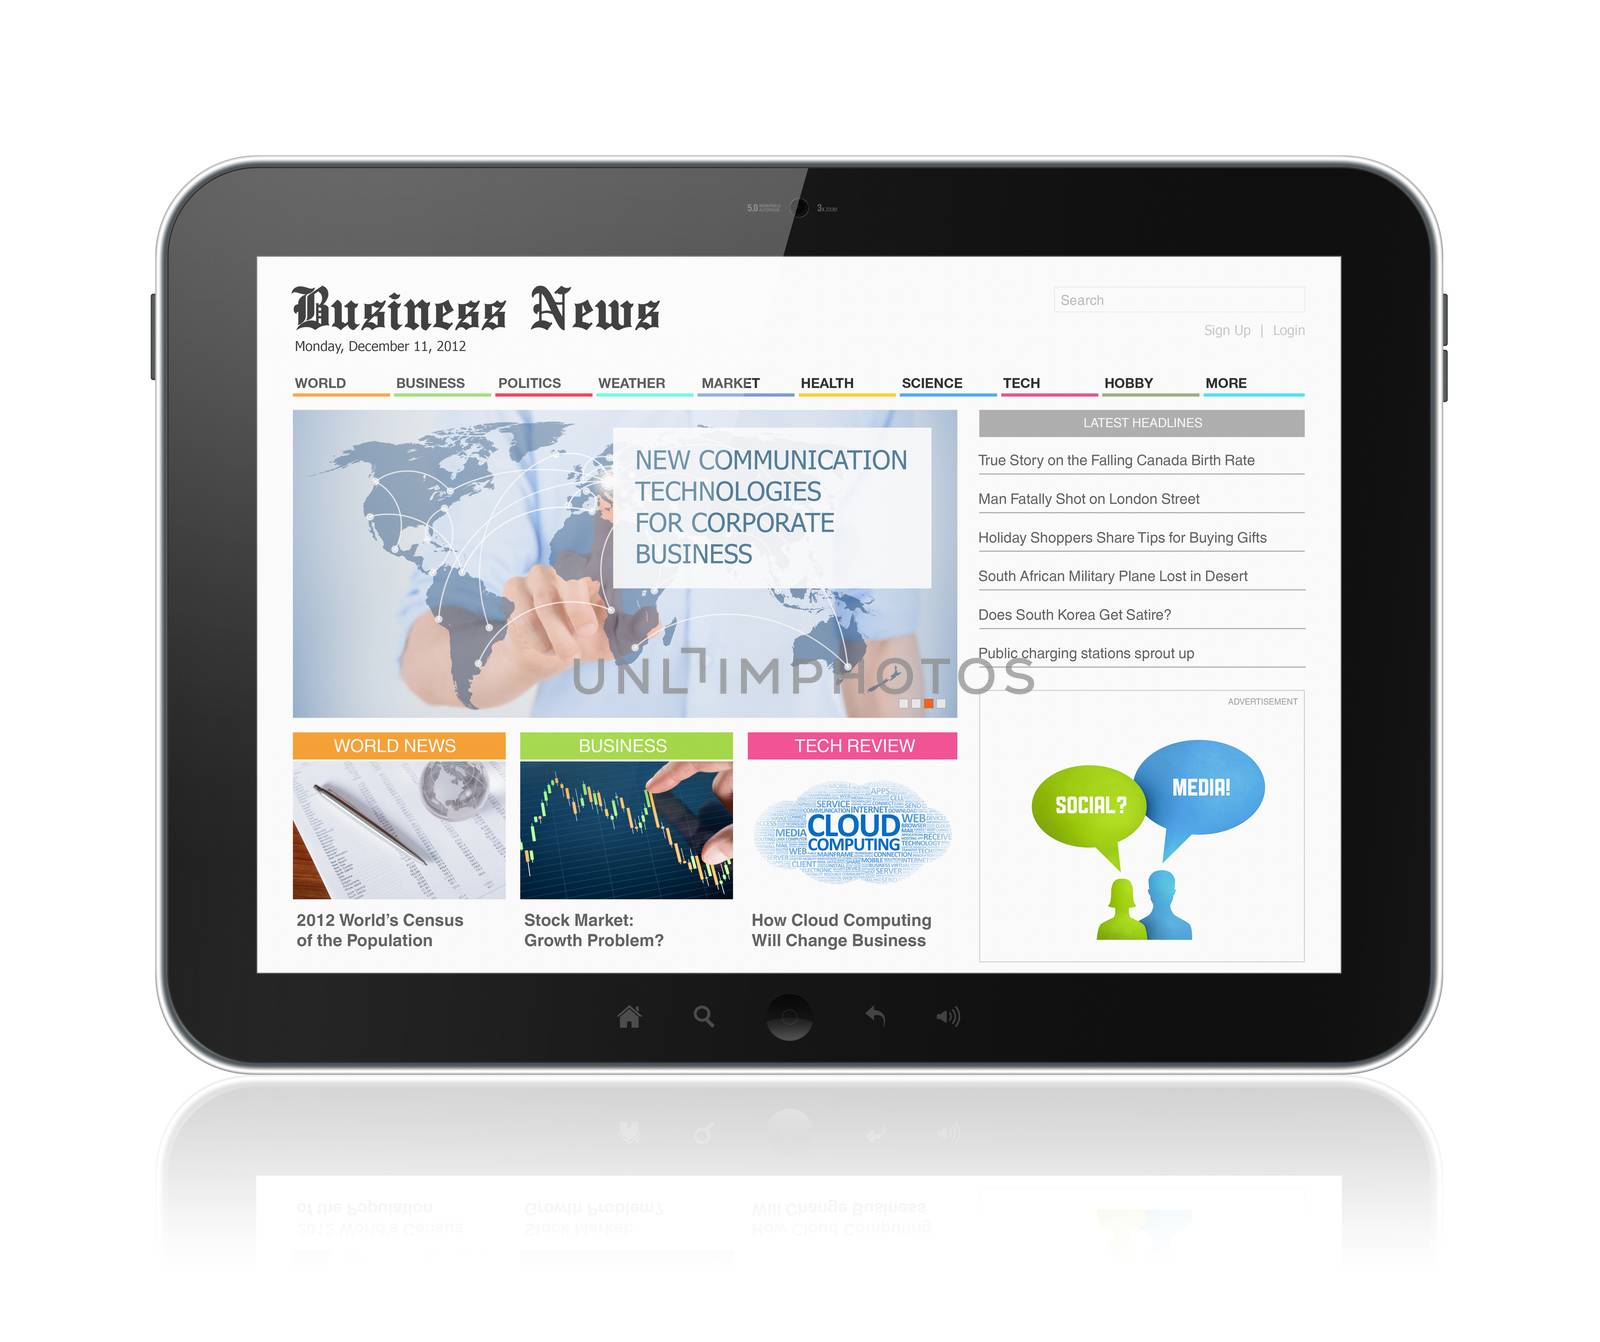 High quality illustration of modern digital tablet with business media website on a screen. Isolated on white background.